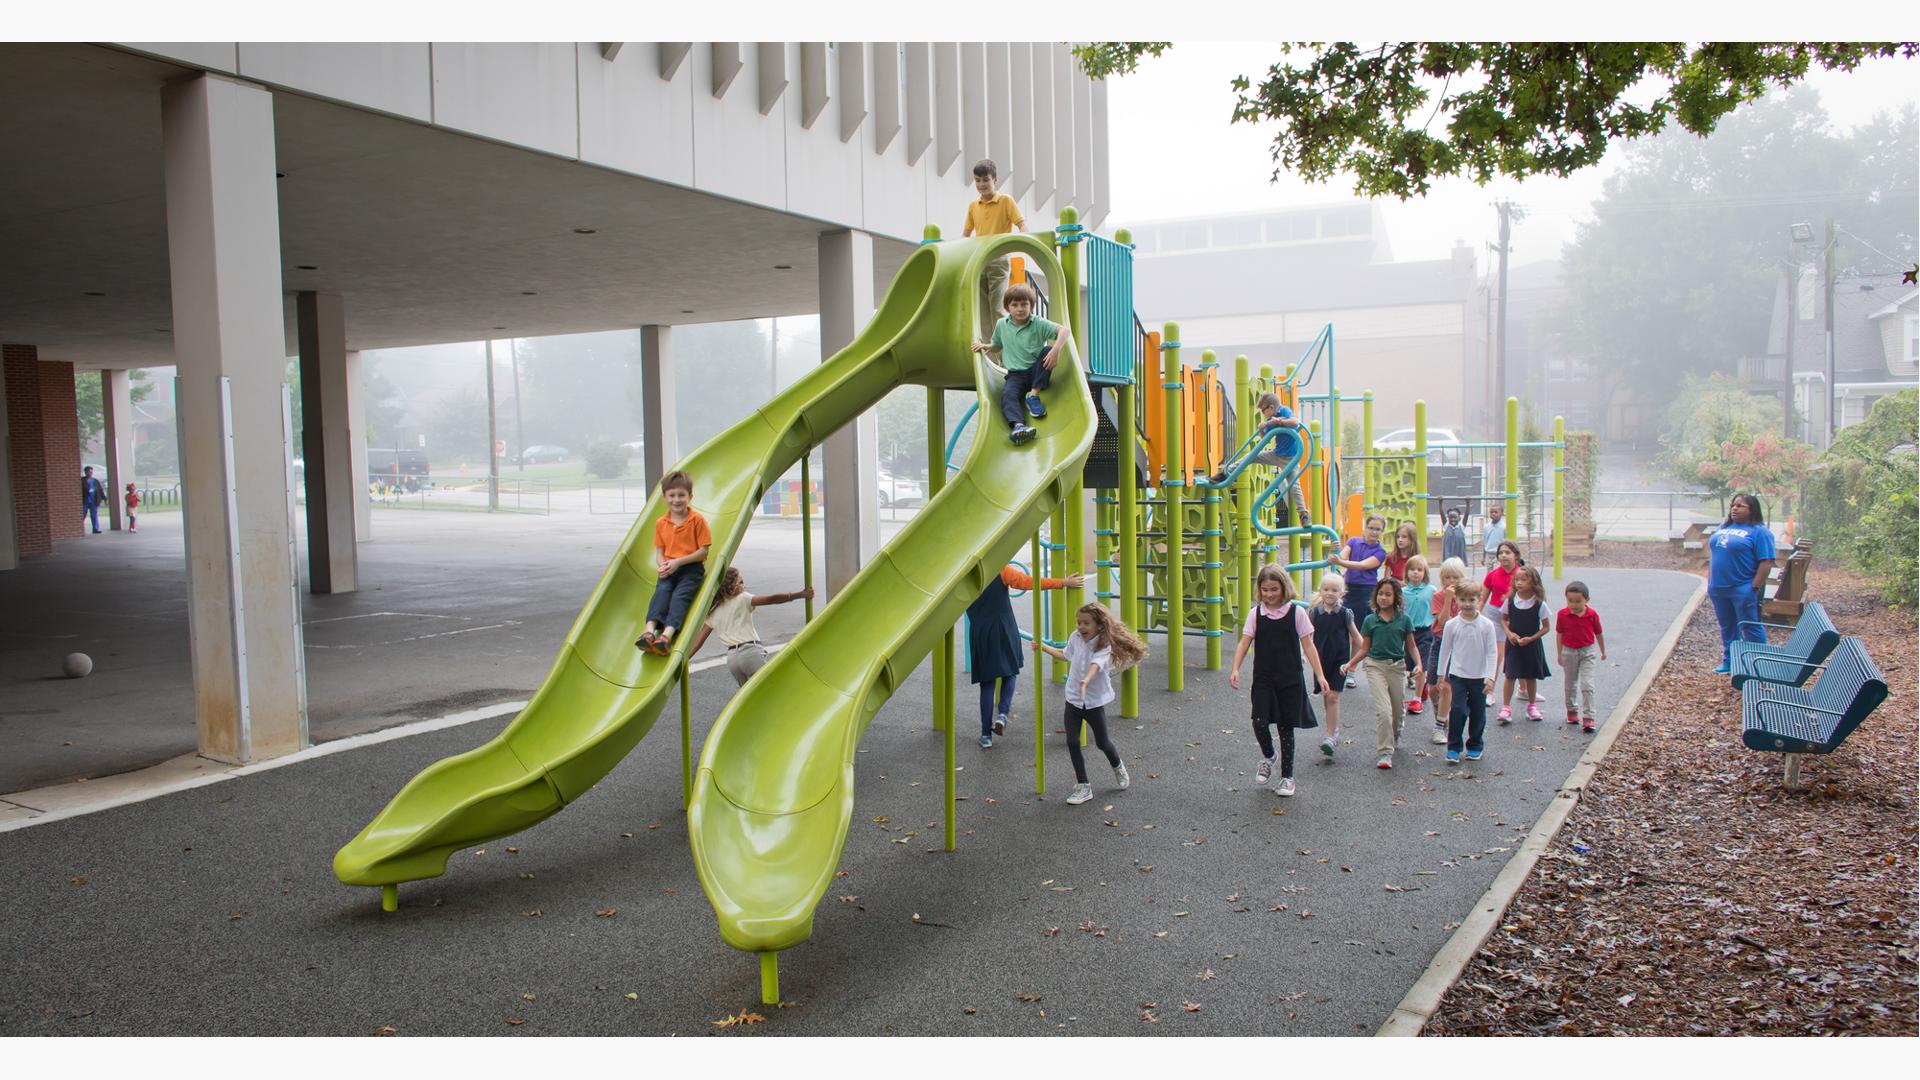 School kids playing in the misting rain on a playground with two limon colored slides in the foreground.